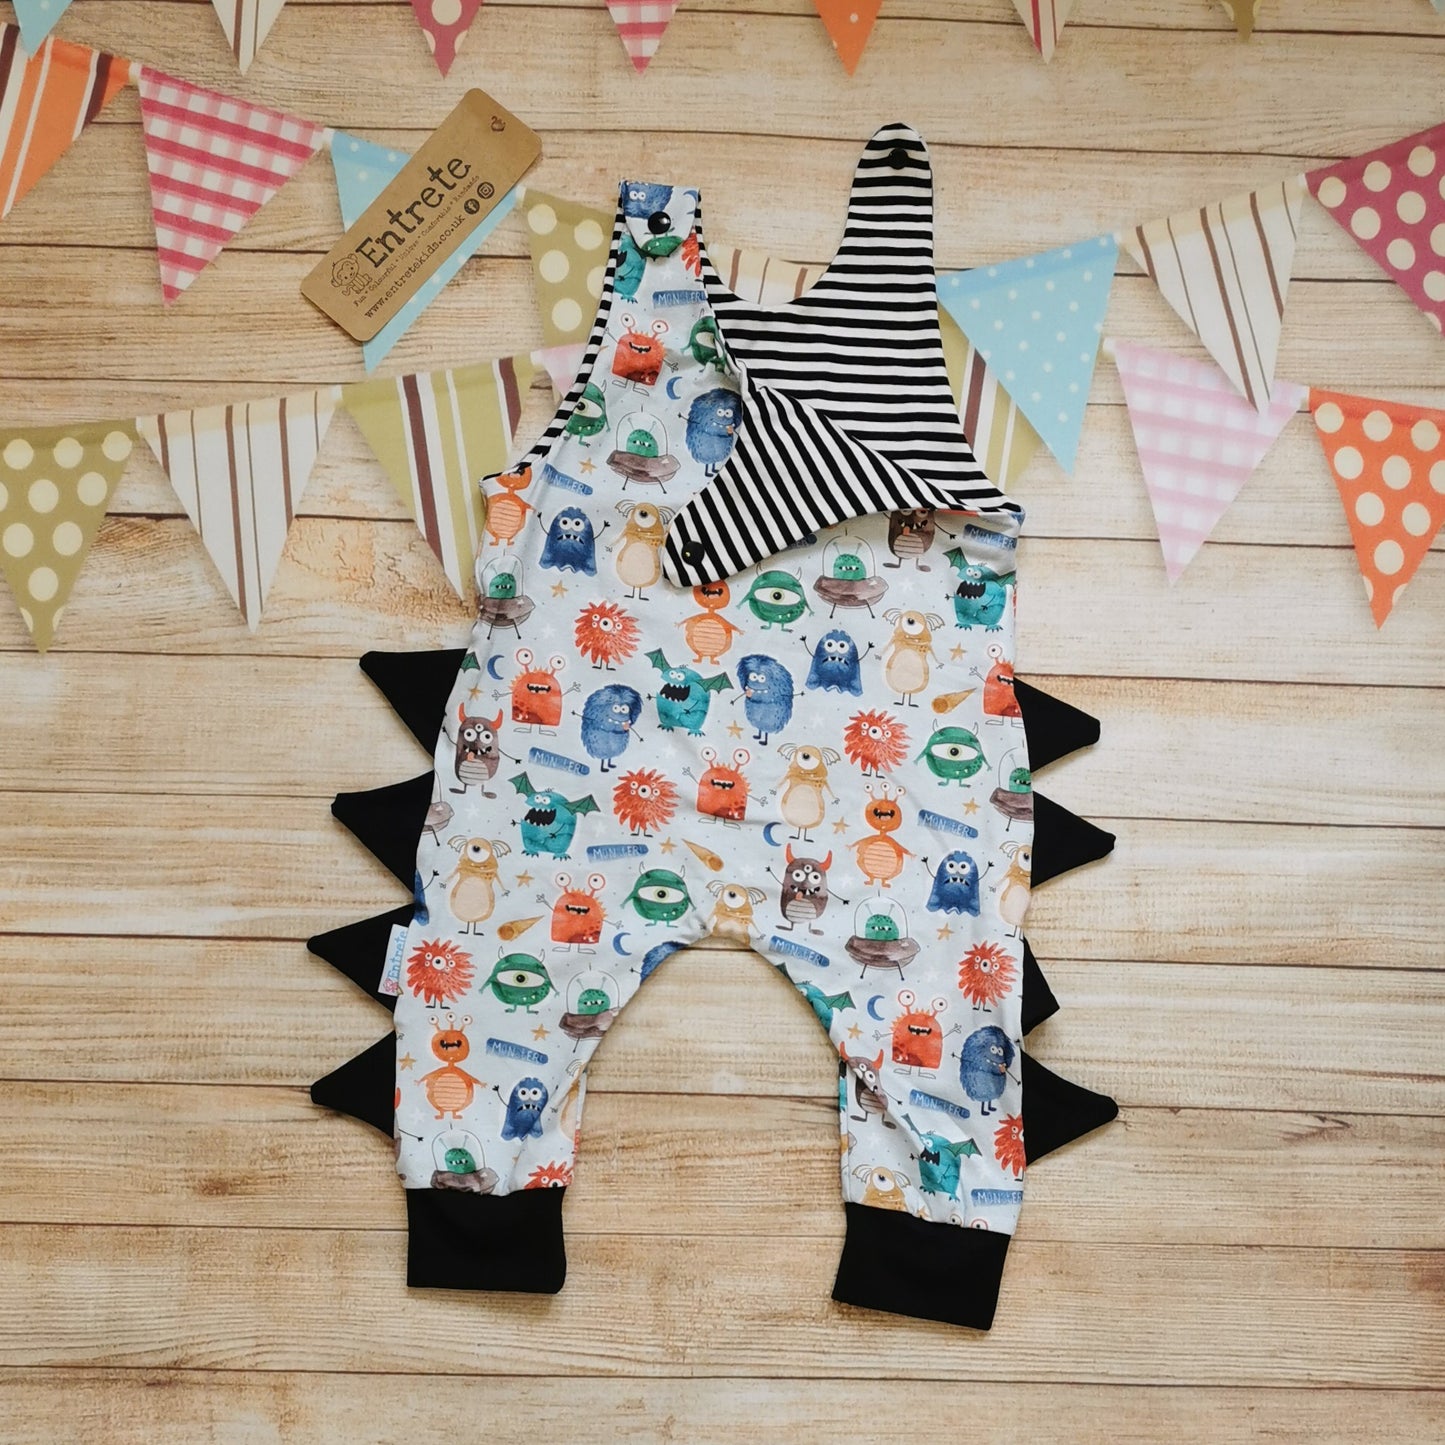 The insanely fun monster romper. Handmade from pale blue monsters cotton jersey, with black cotton jersey side detailing and cuffs and striped cotton jersey upper lining. Shown with one shoulder open revealing the striped upper lining.